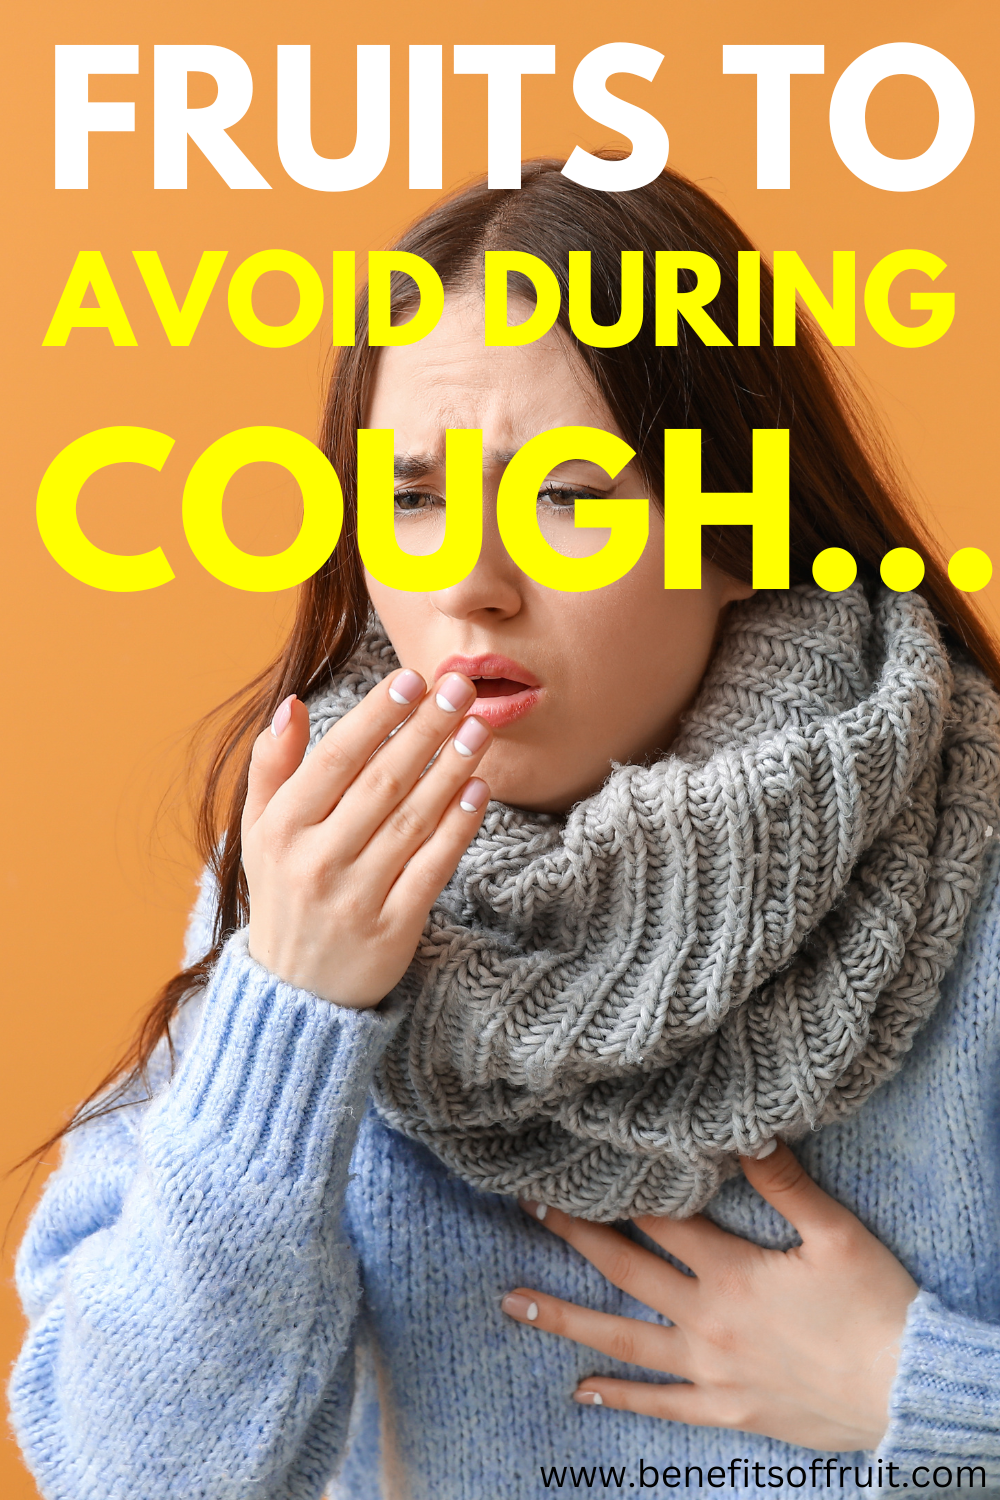 Fruits To Avoid During Cough